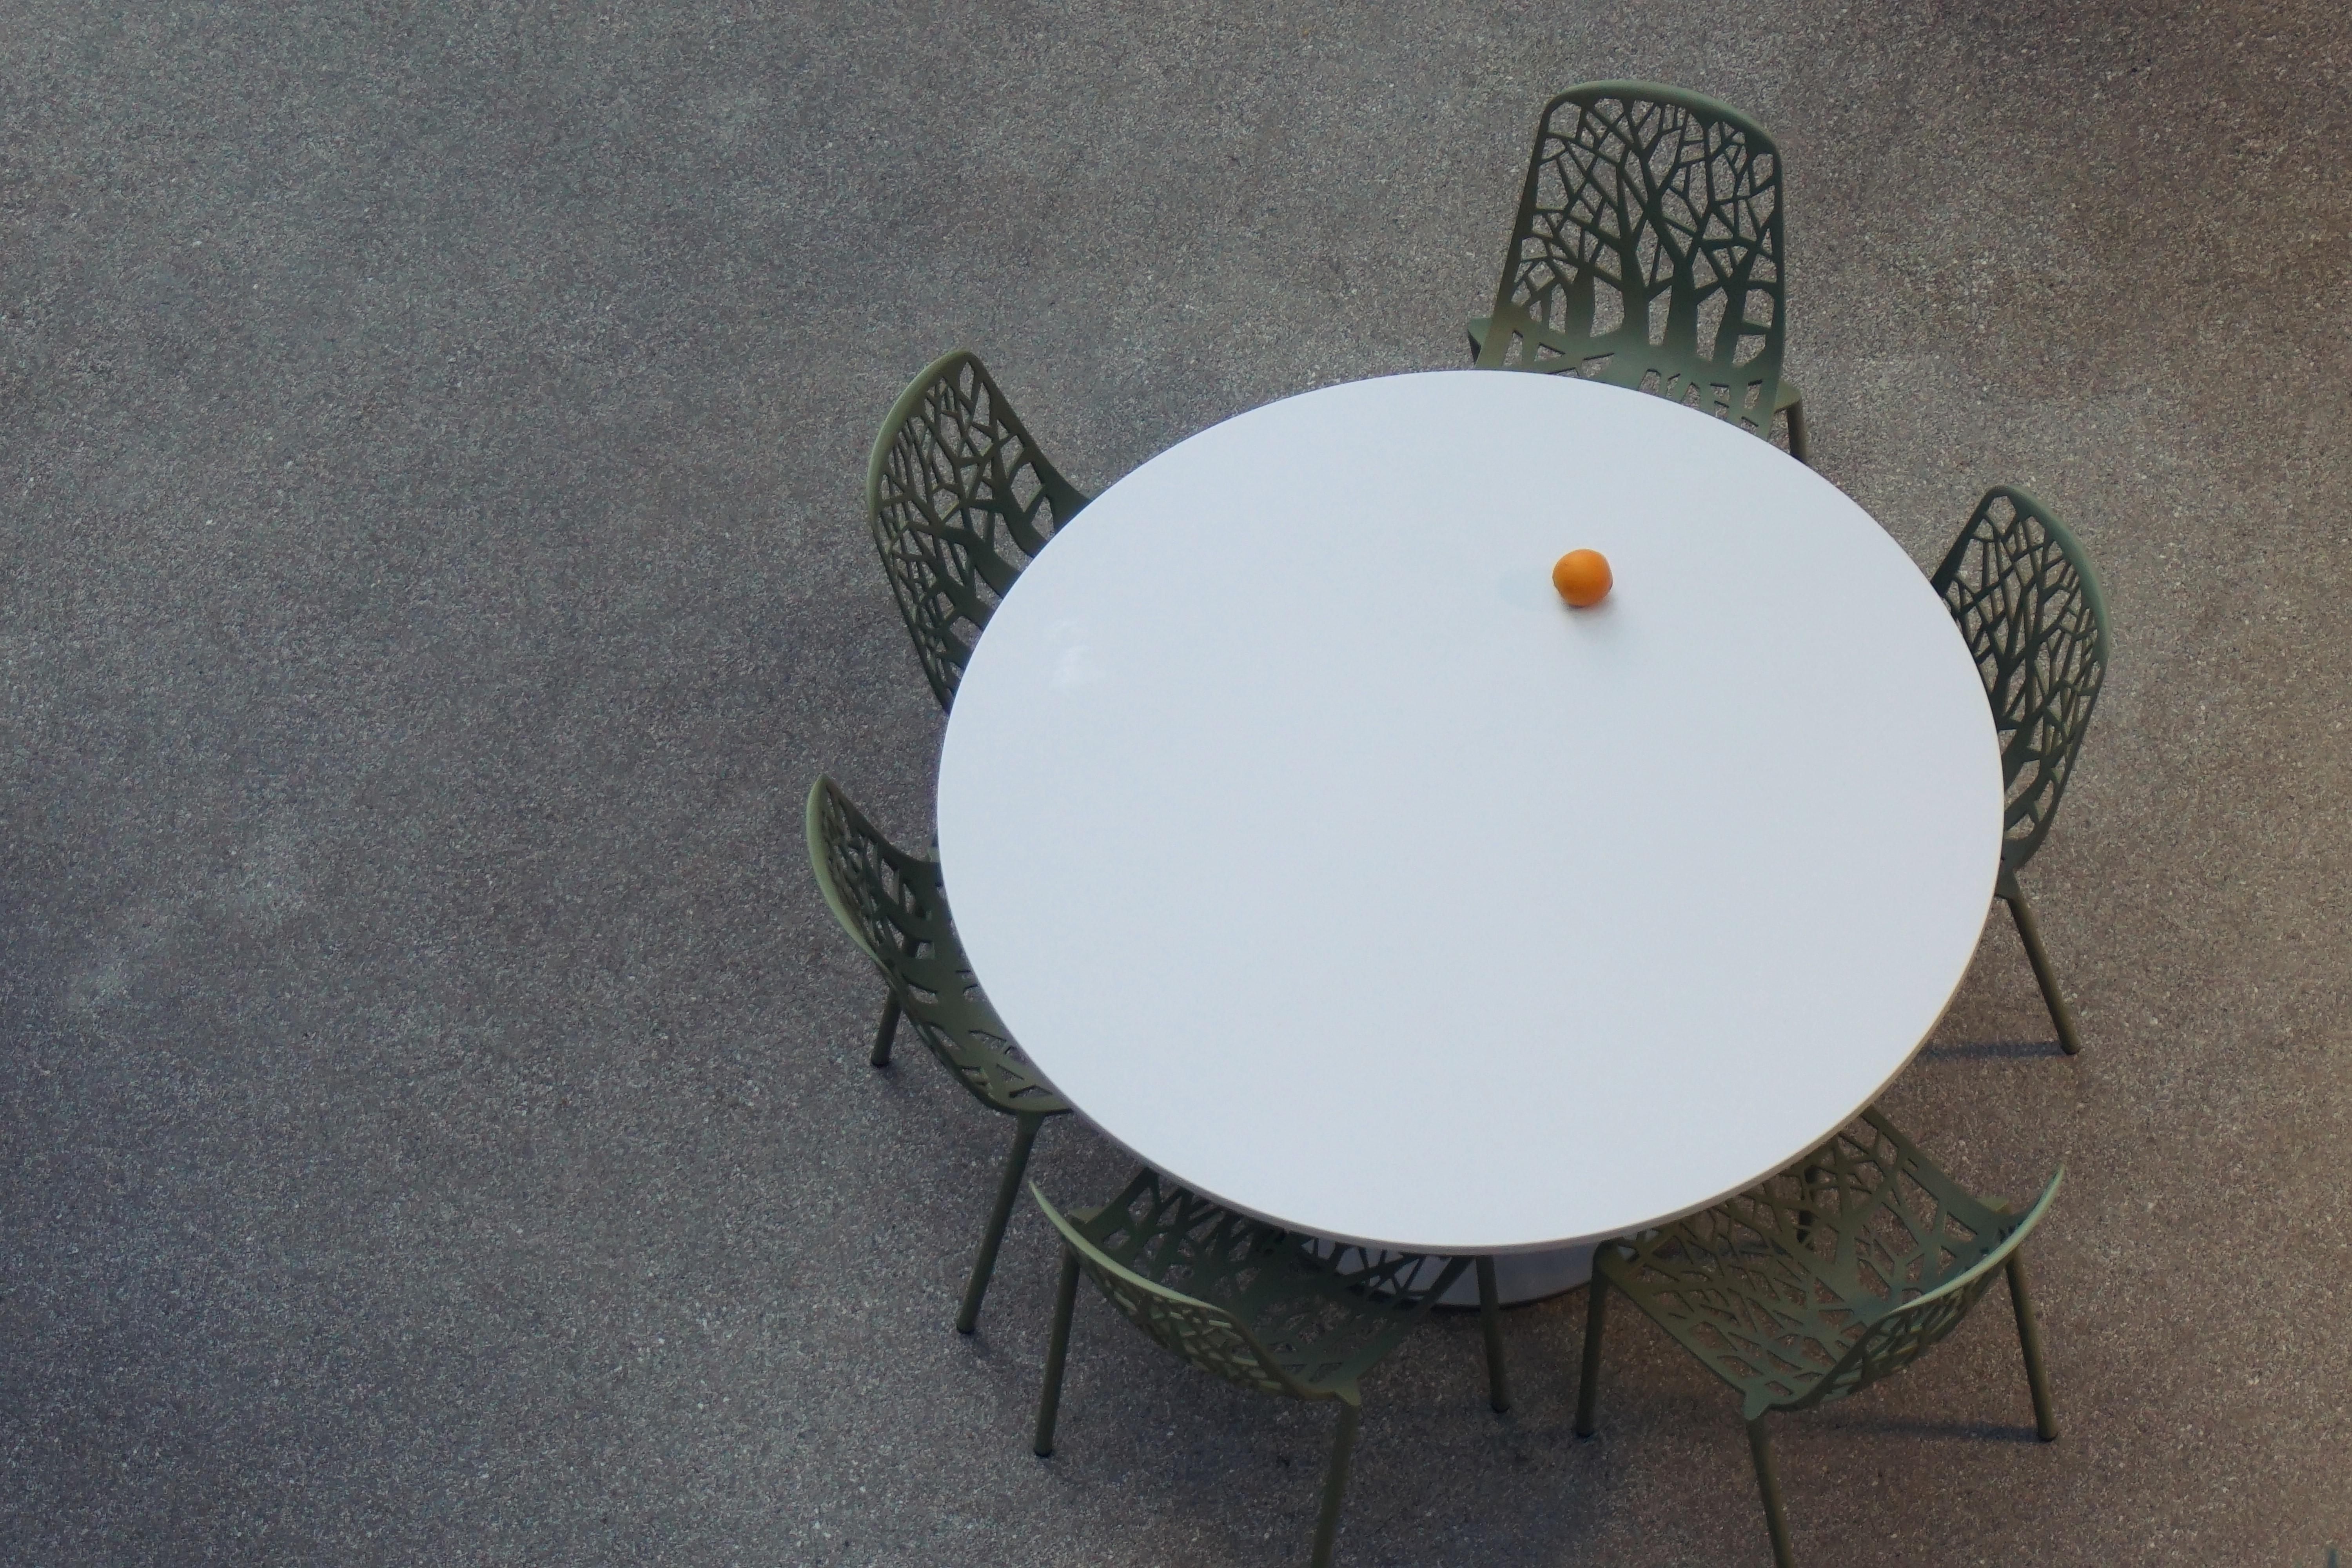 A photo of a circular table with six chairs. There is one lone orange on the table.